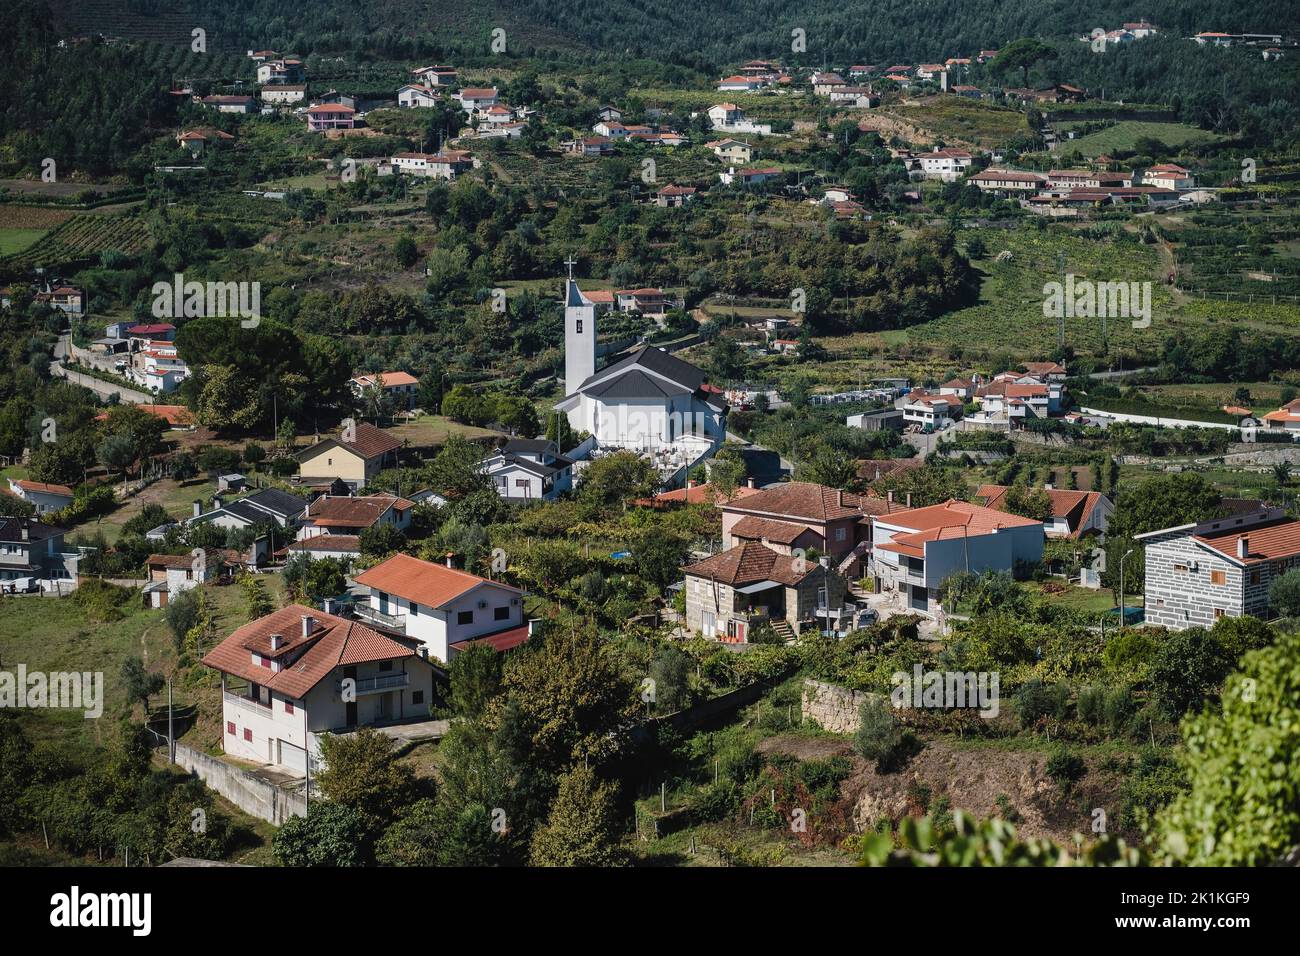 View of residential houses and a church in the hills of the Douro Valley, Porto, Portugal. Stock Photo